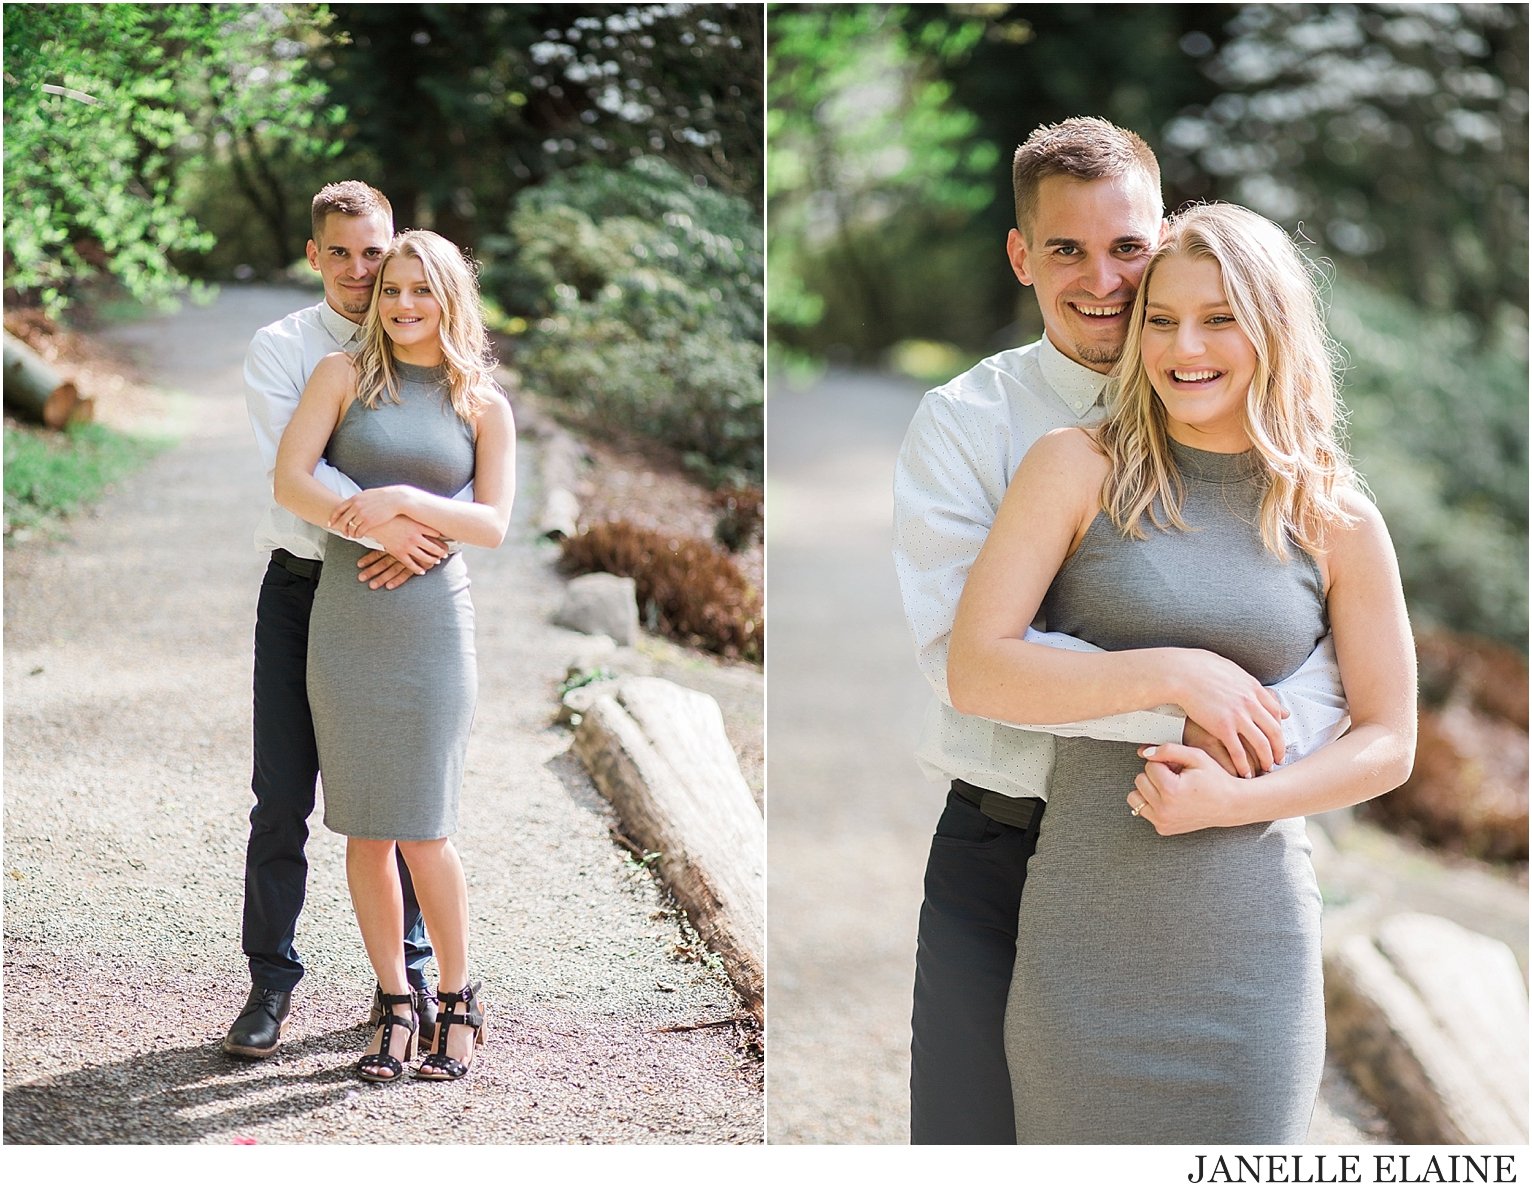 tricia and nate engagement photos-janelle elaine photography-23.jpg